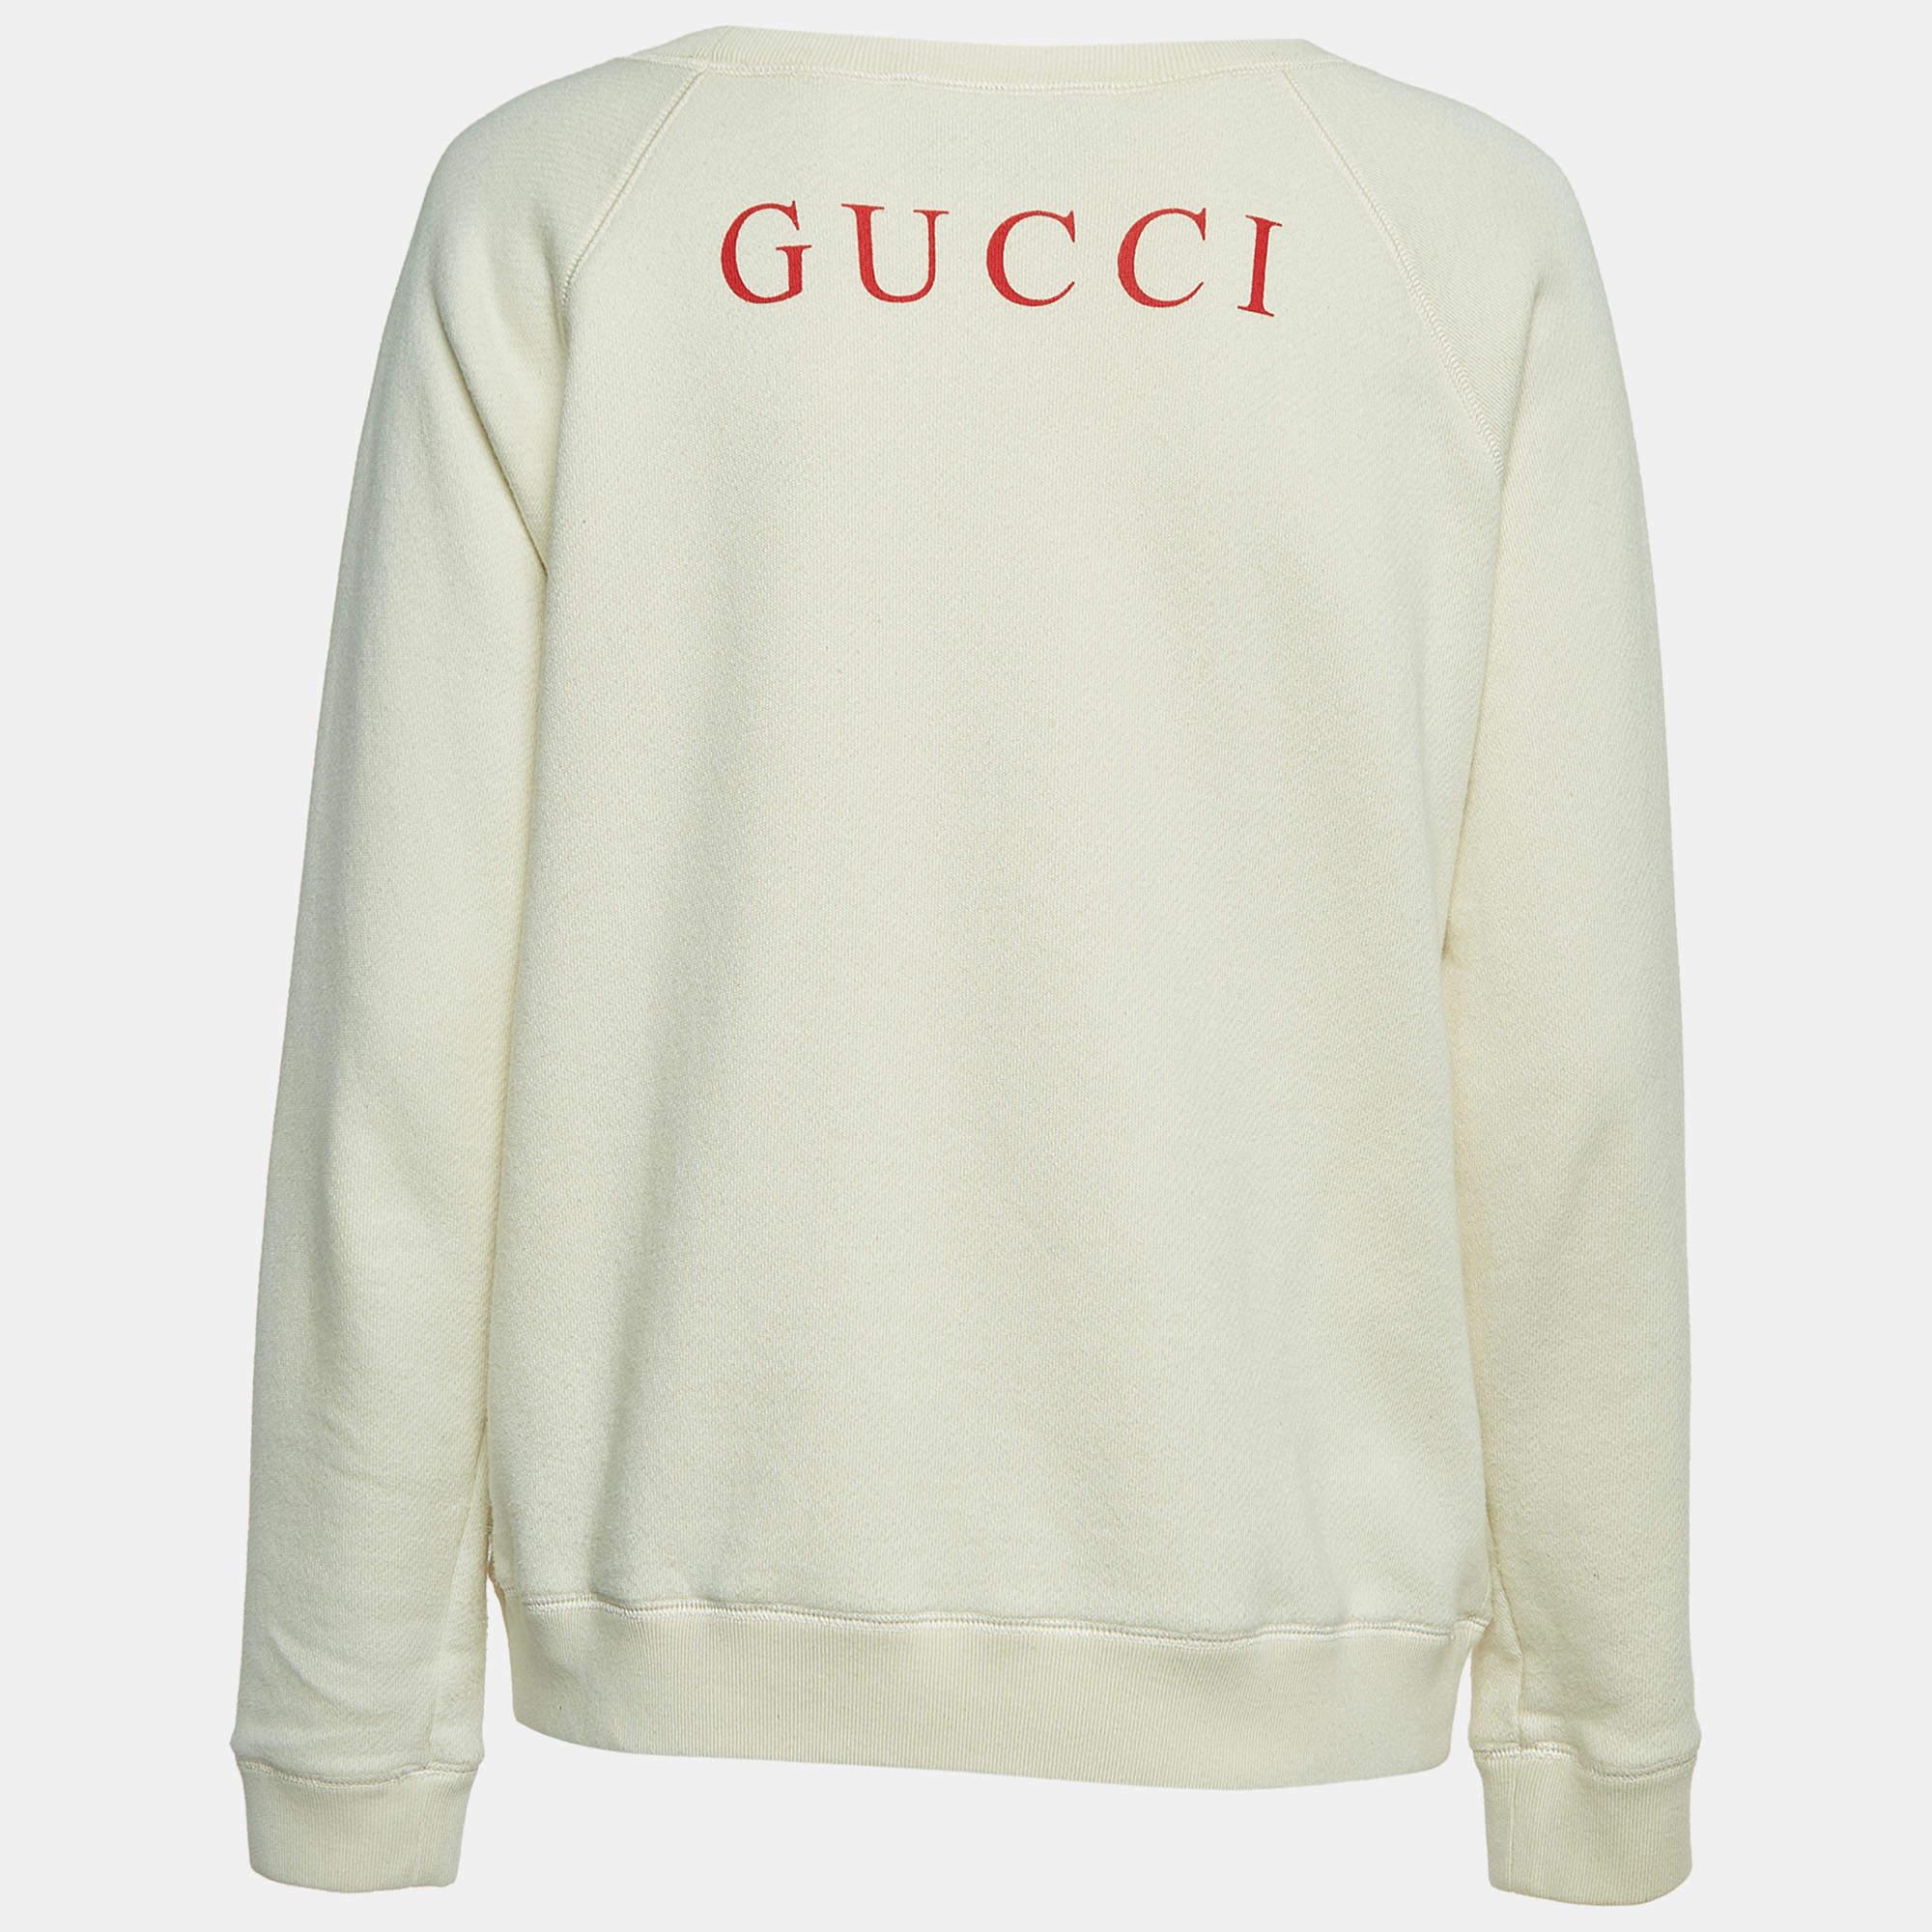 Discover the epitome of cozy chic with this Gucci women's sweatshirt. Crafted for both warmth and style, it combines comfort with fashion-forward detailing, making it your go-to choice for casual sophistication.

